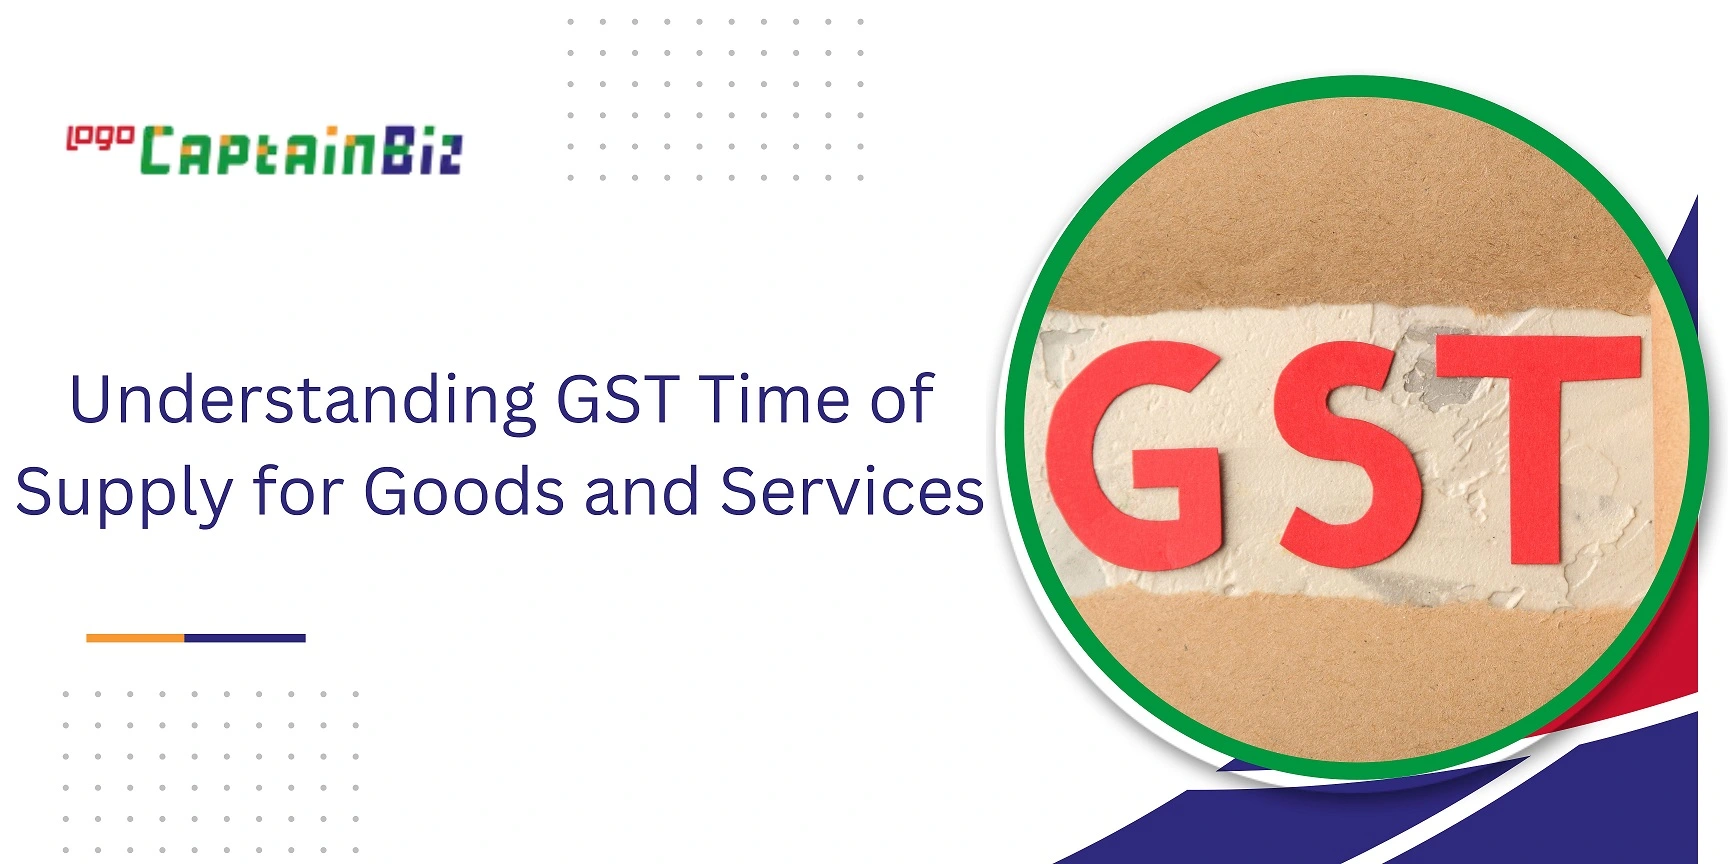 CaptainBiz: Understanding GST Time of Supply for Goods and Services